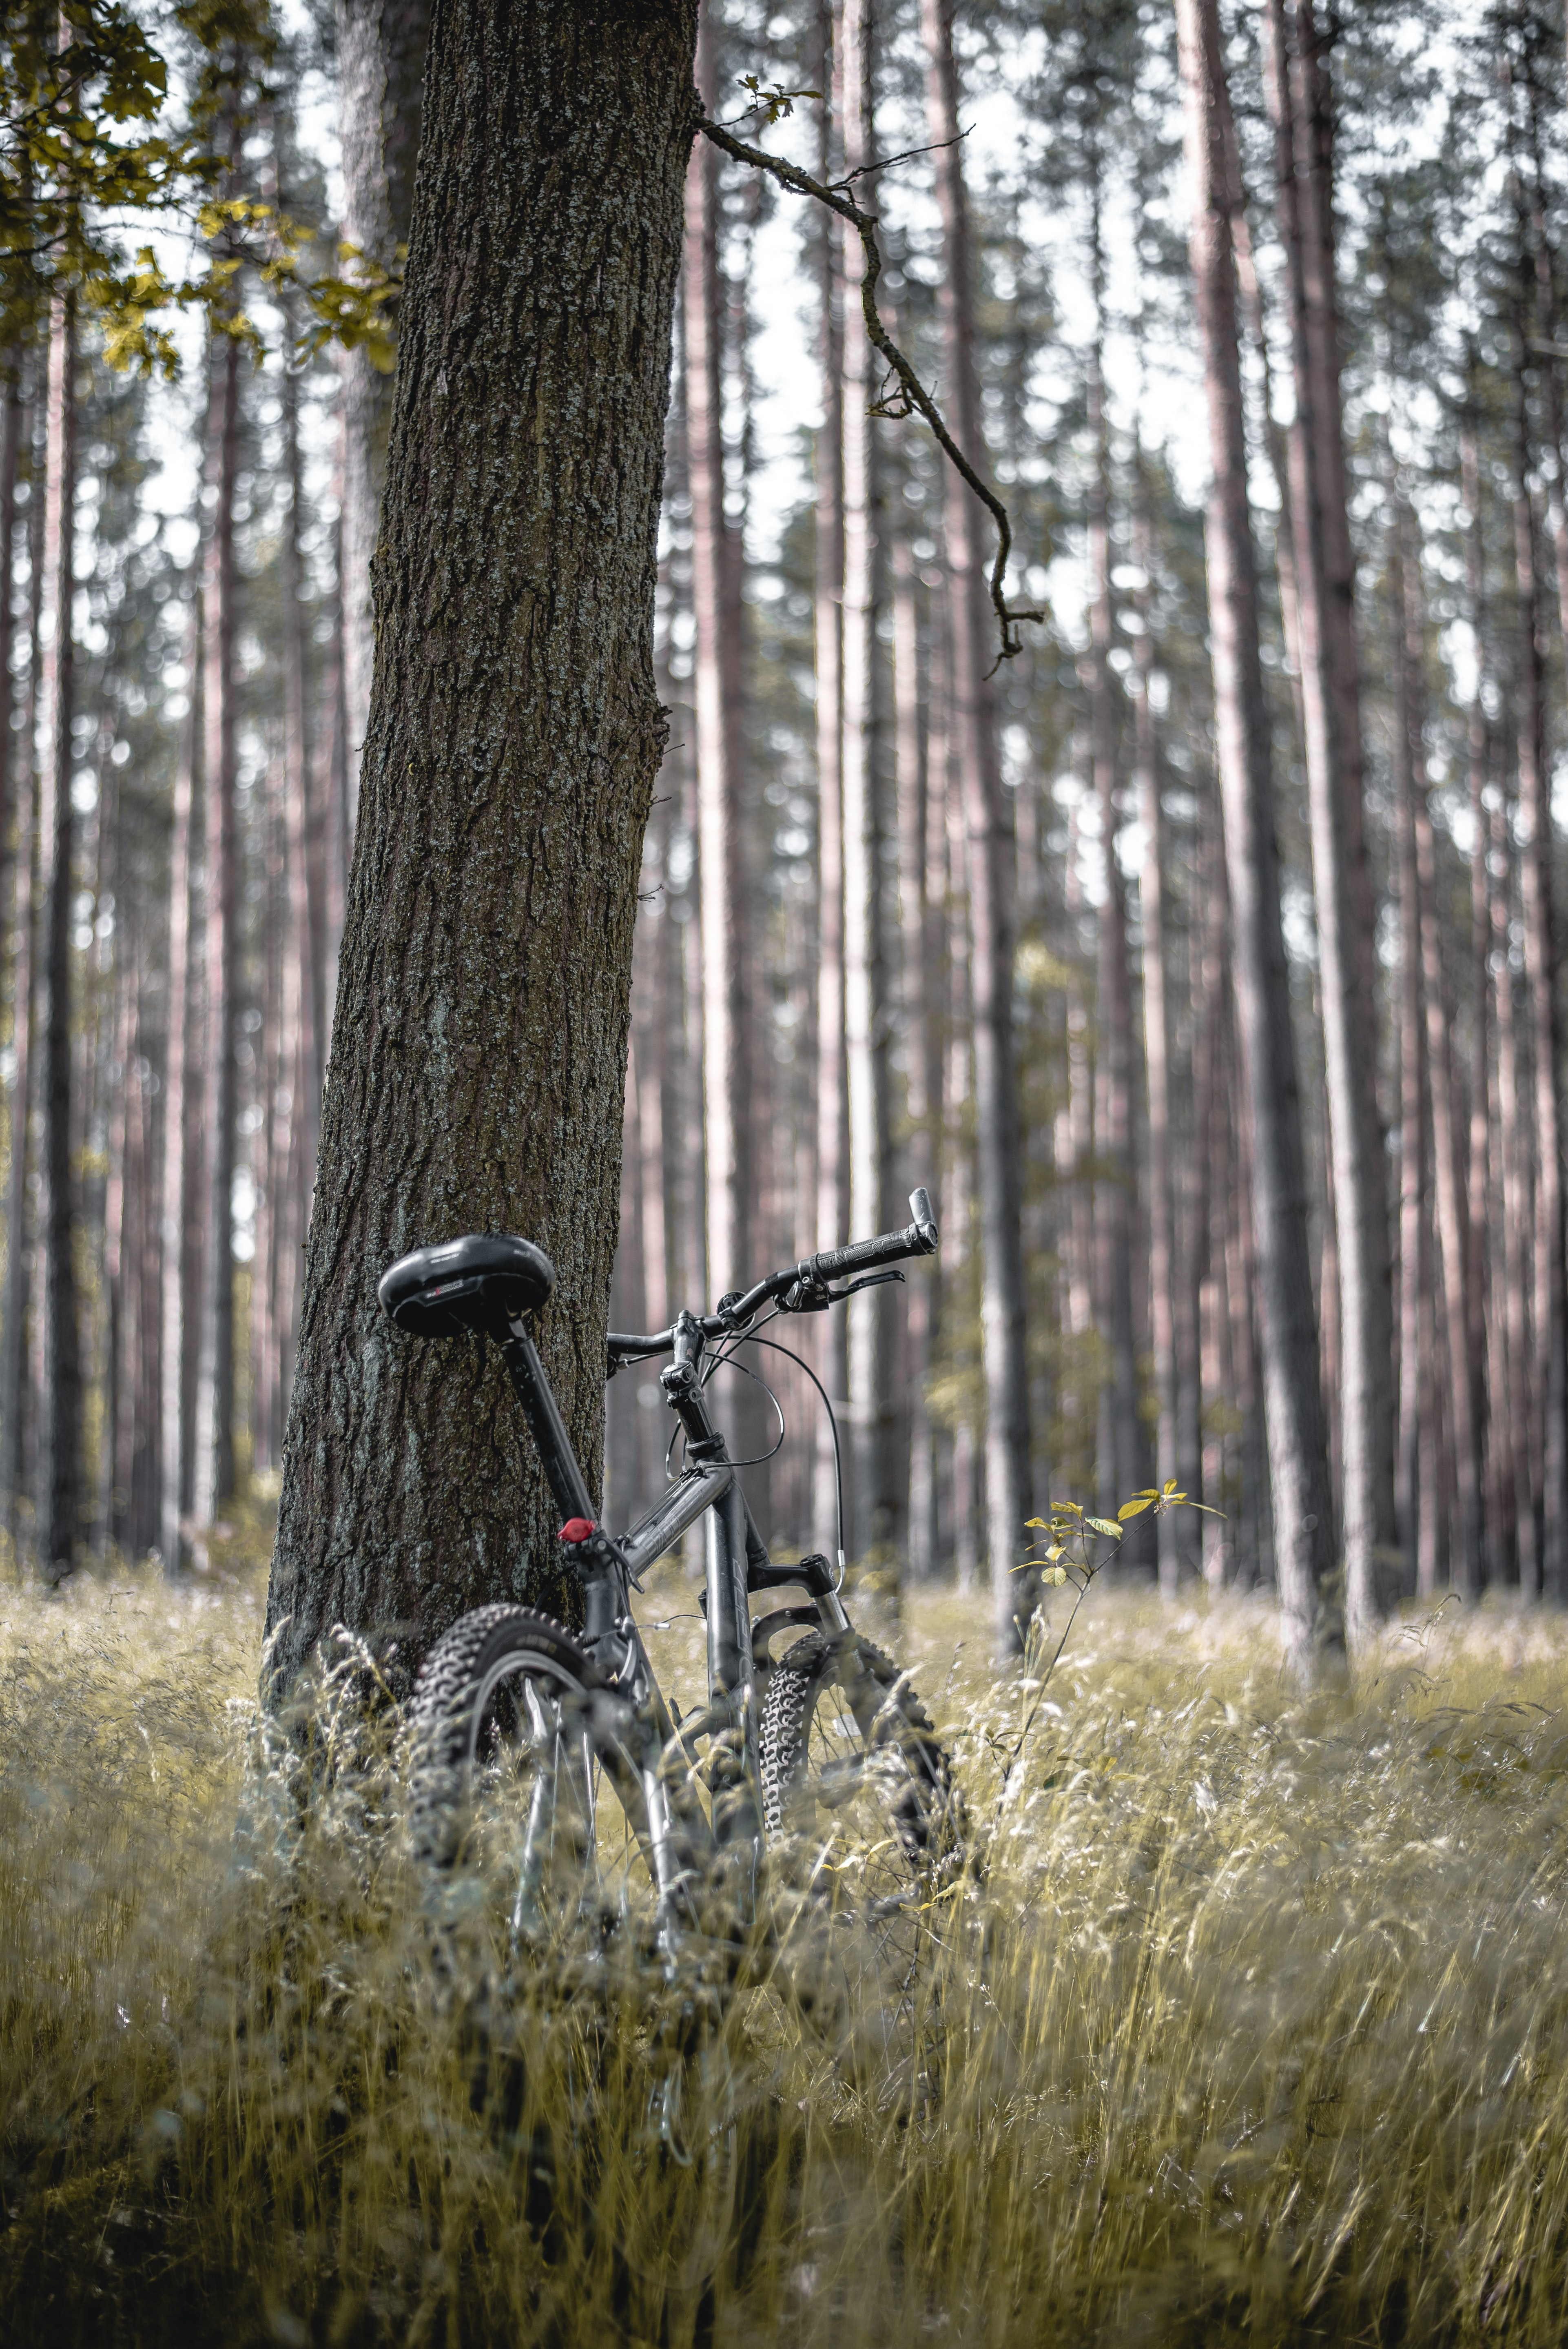 miscellaneous, trees, miscellanea, forest, stroll, bicycle 2160p